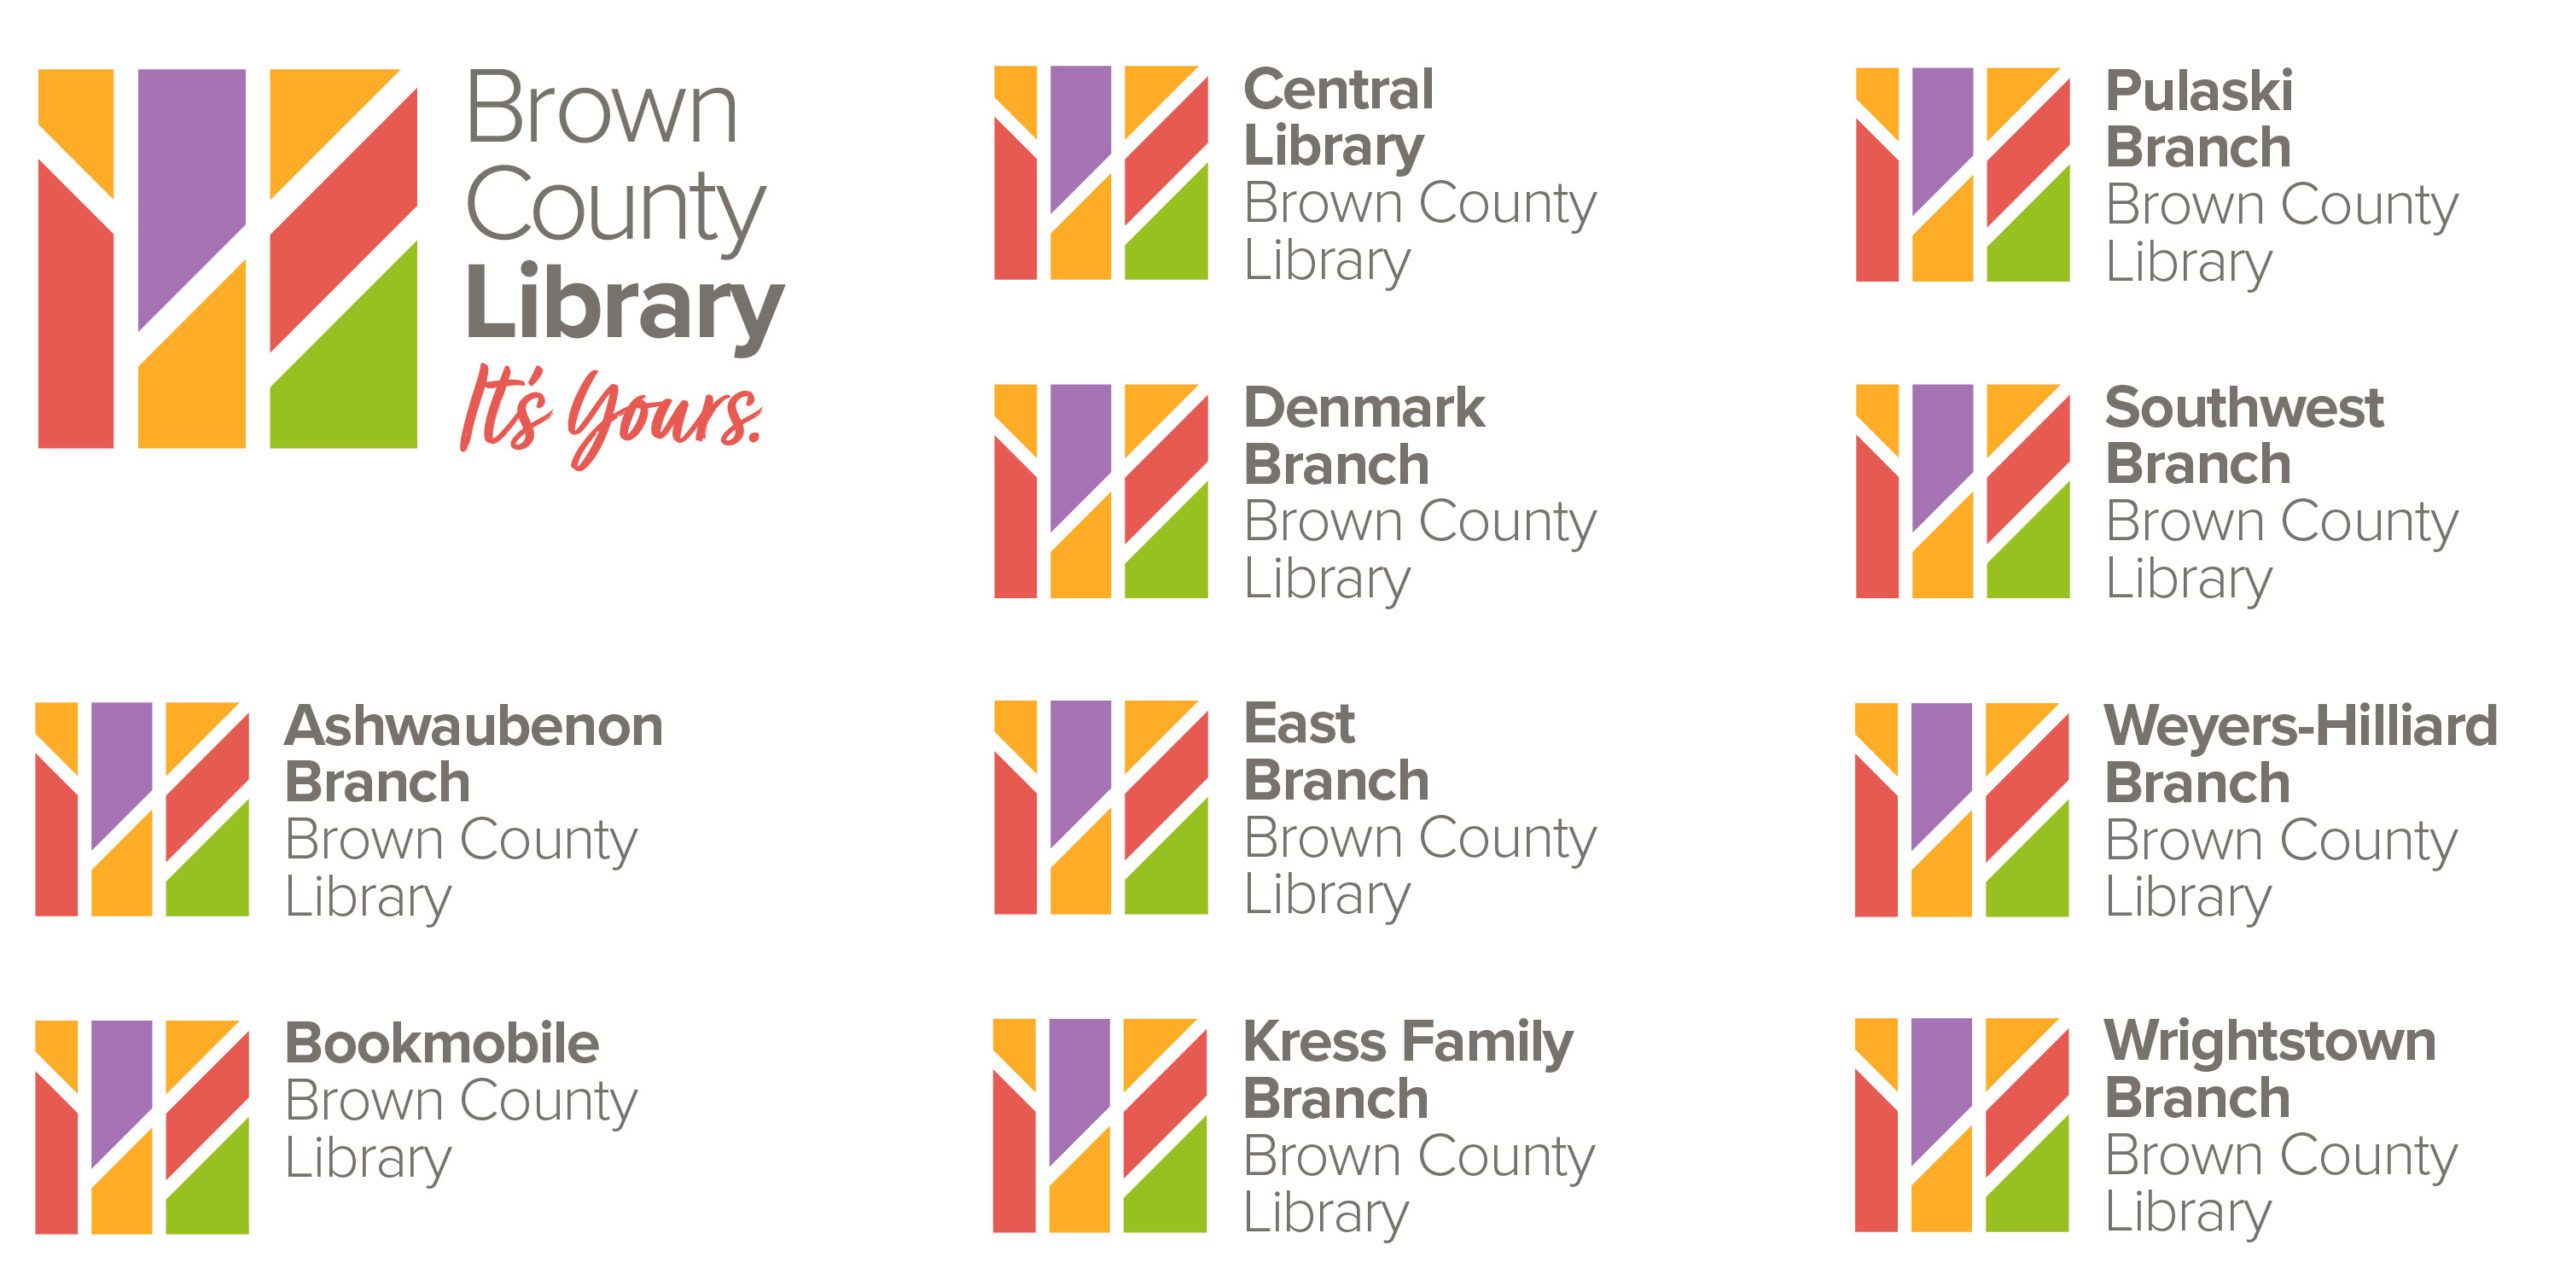 Brown County Library - It's yours. - Branch logos